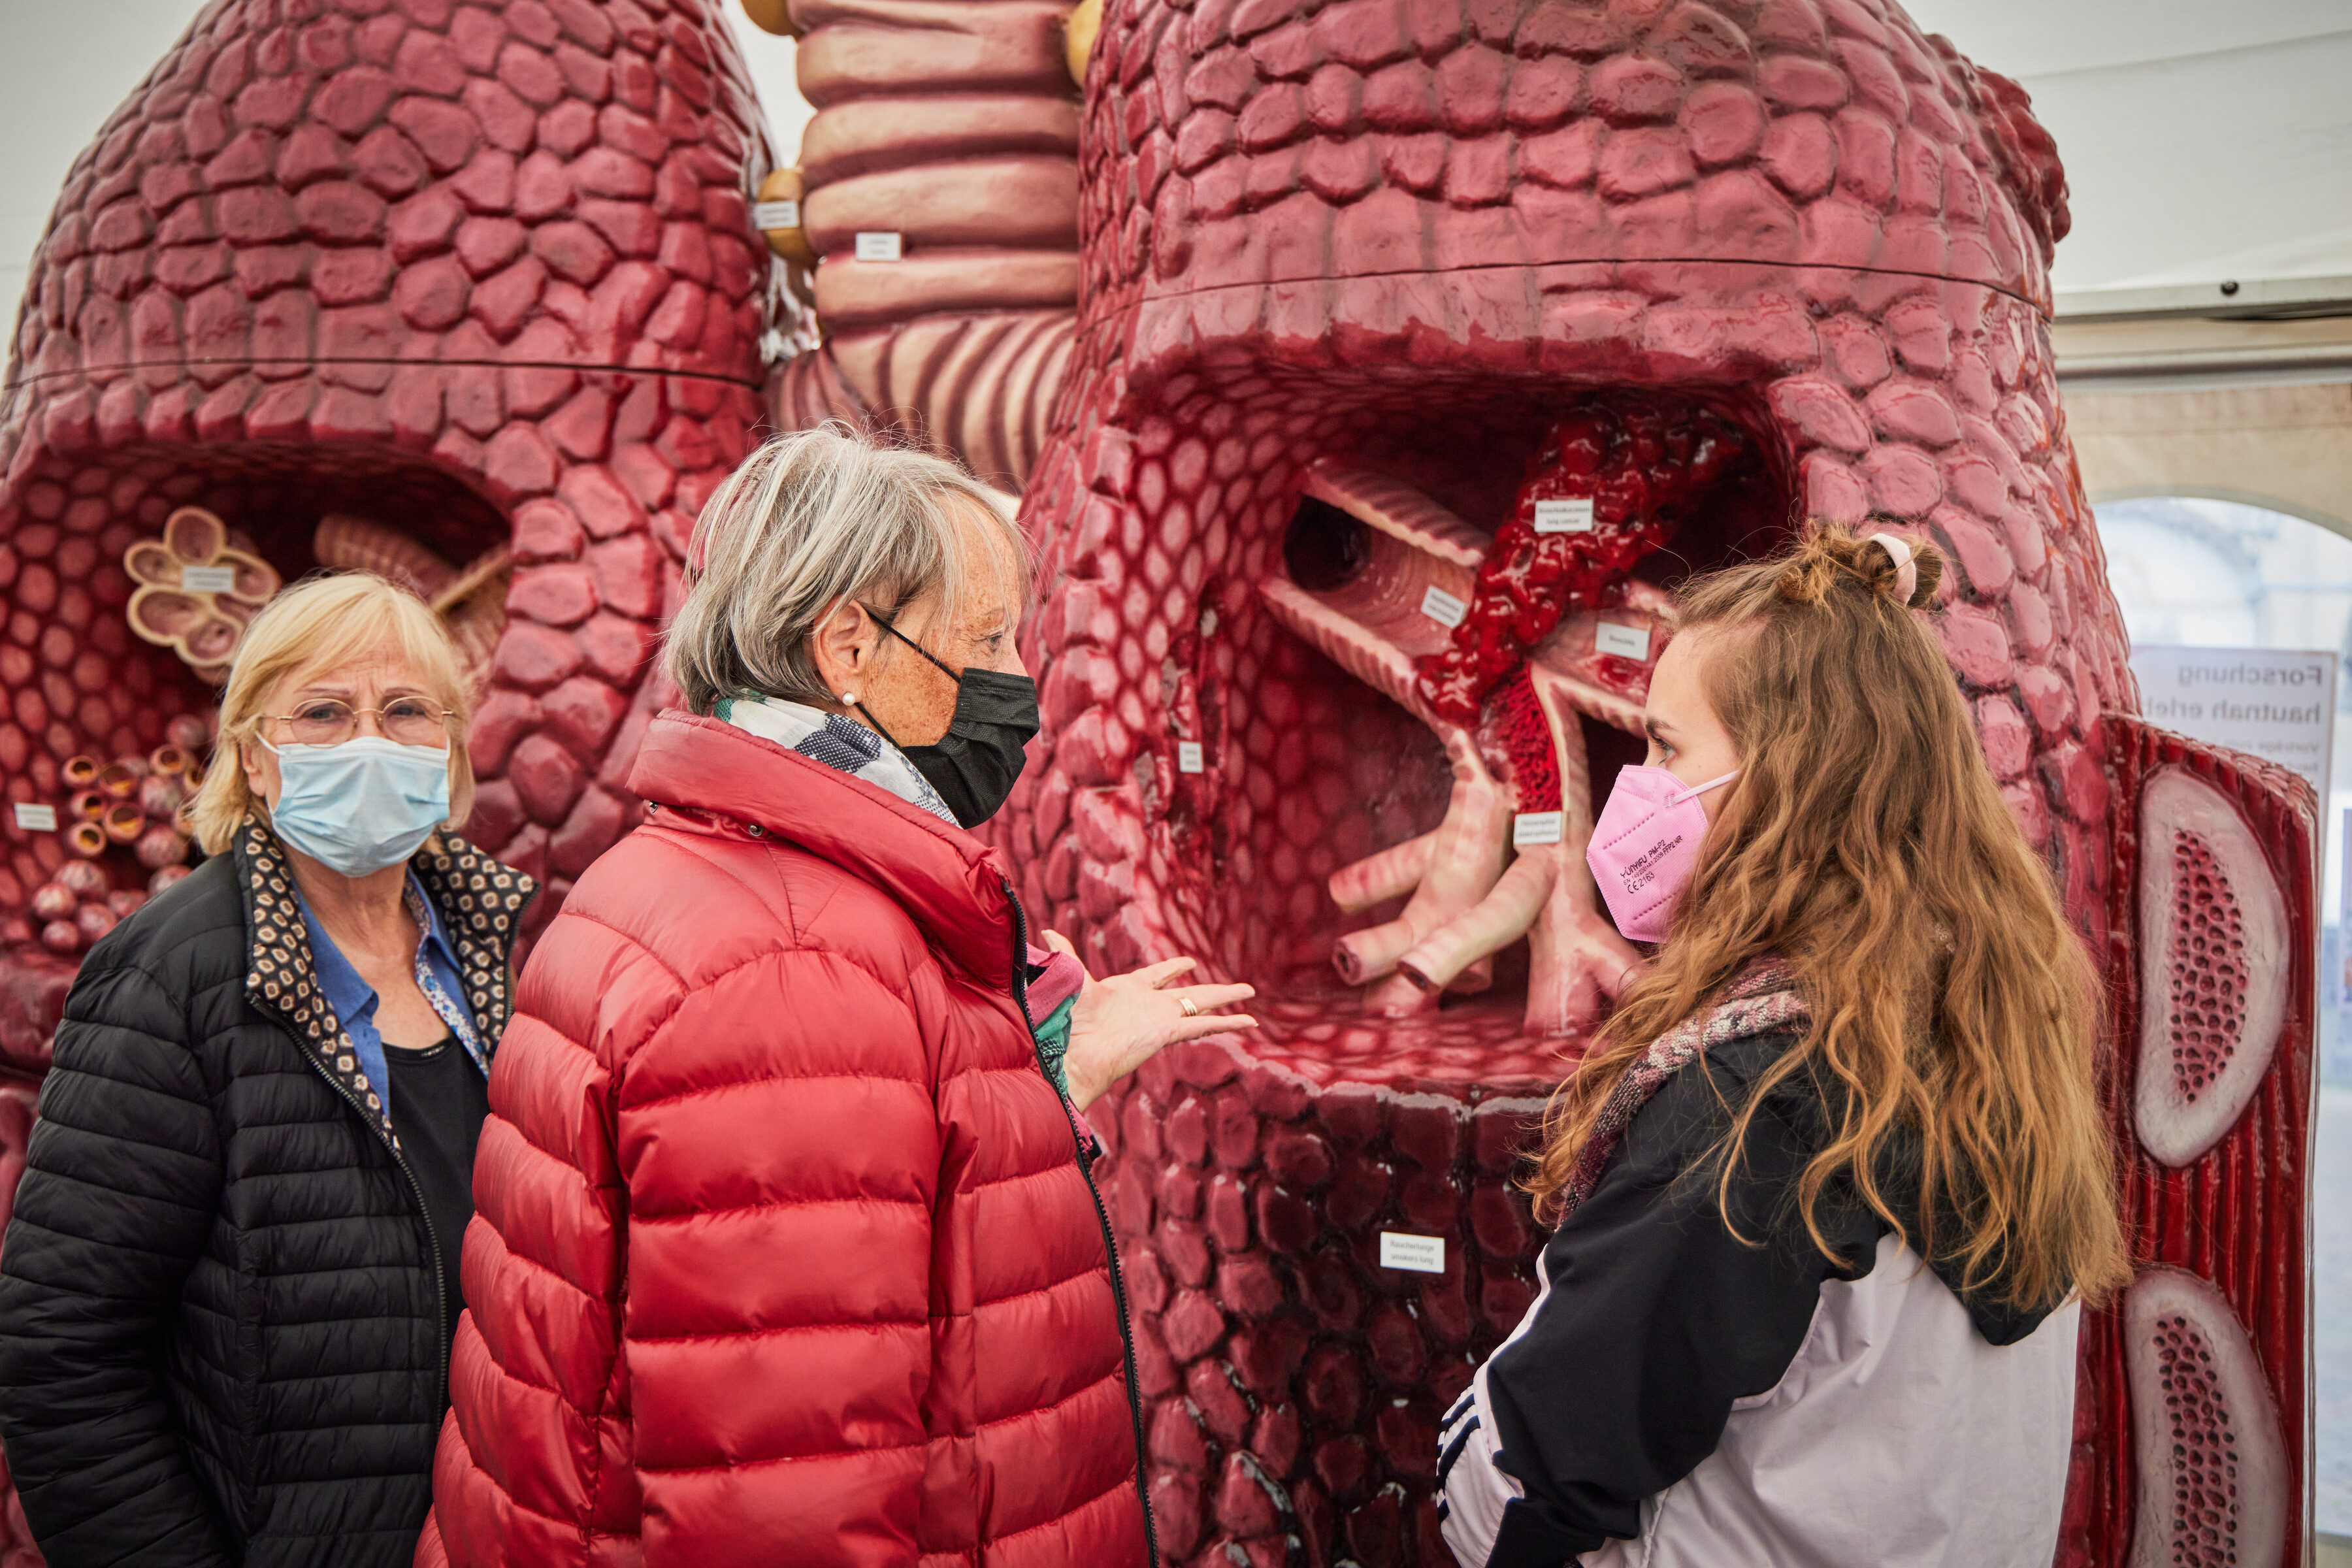 giant lung model